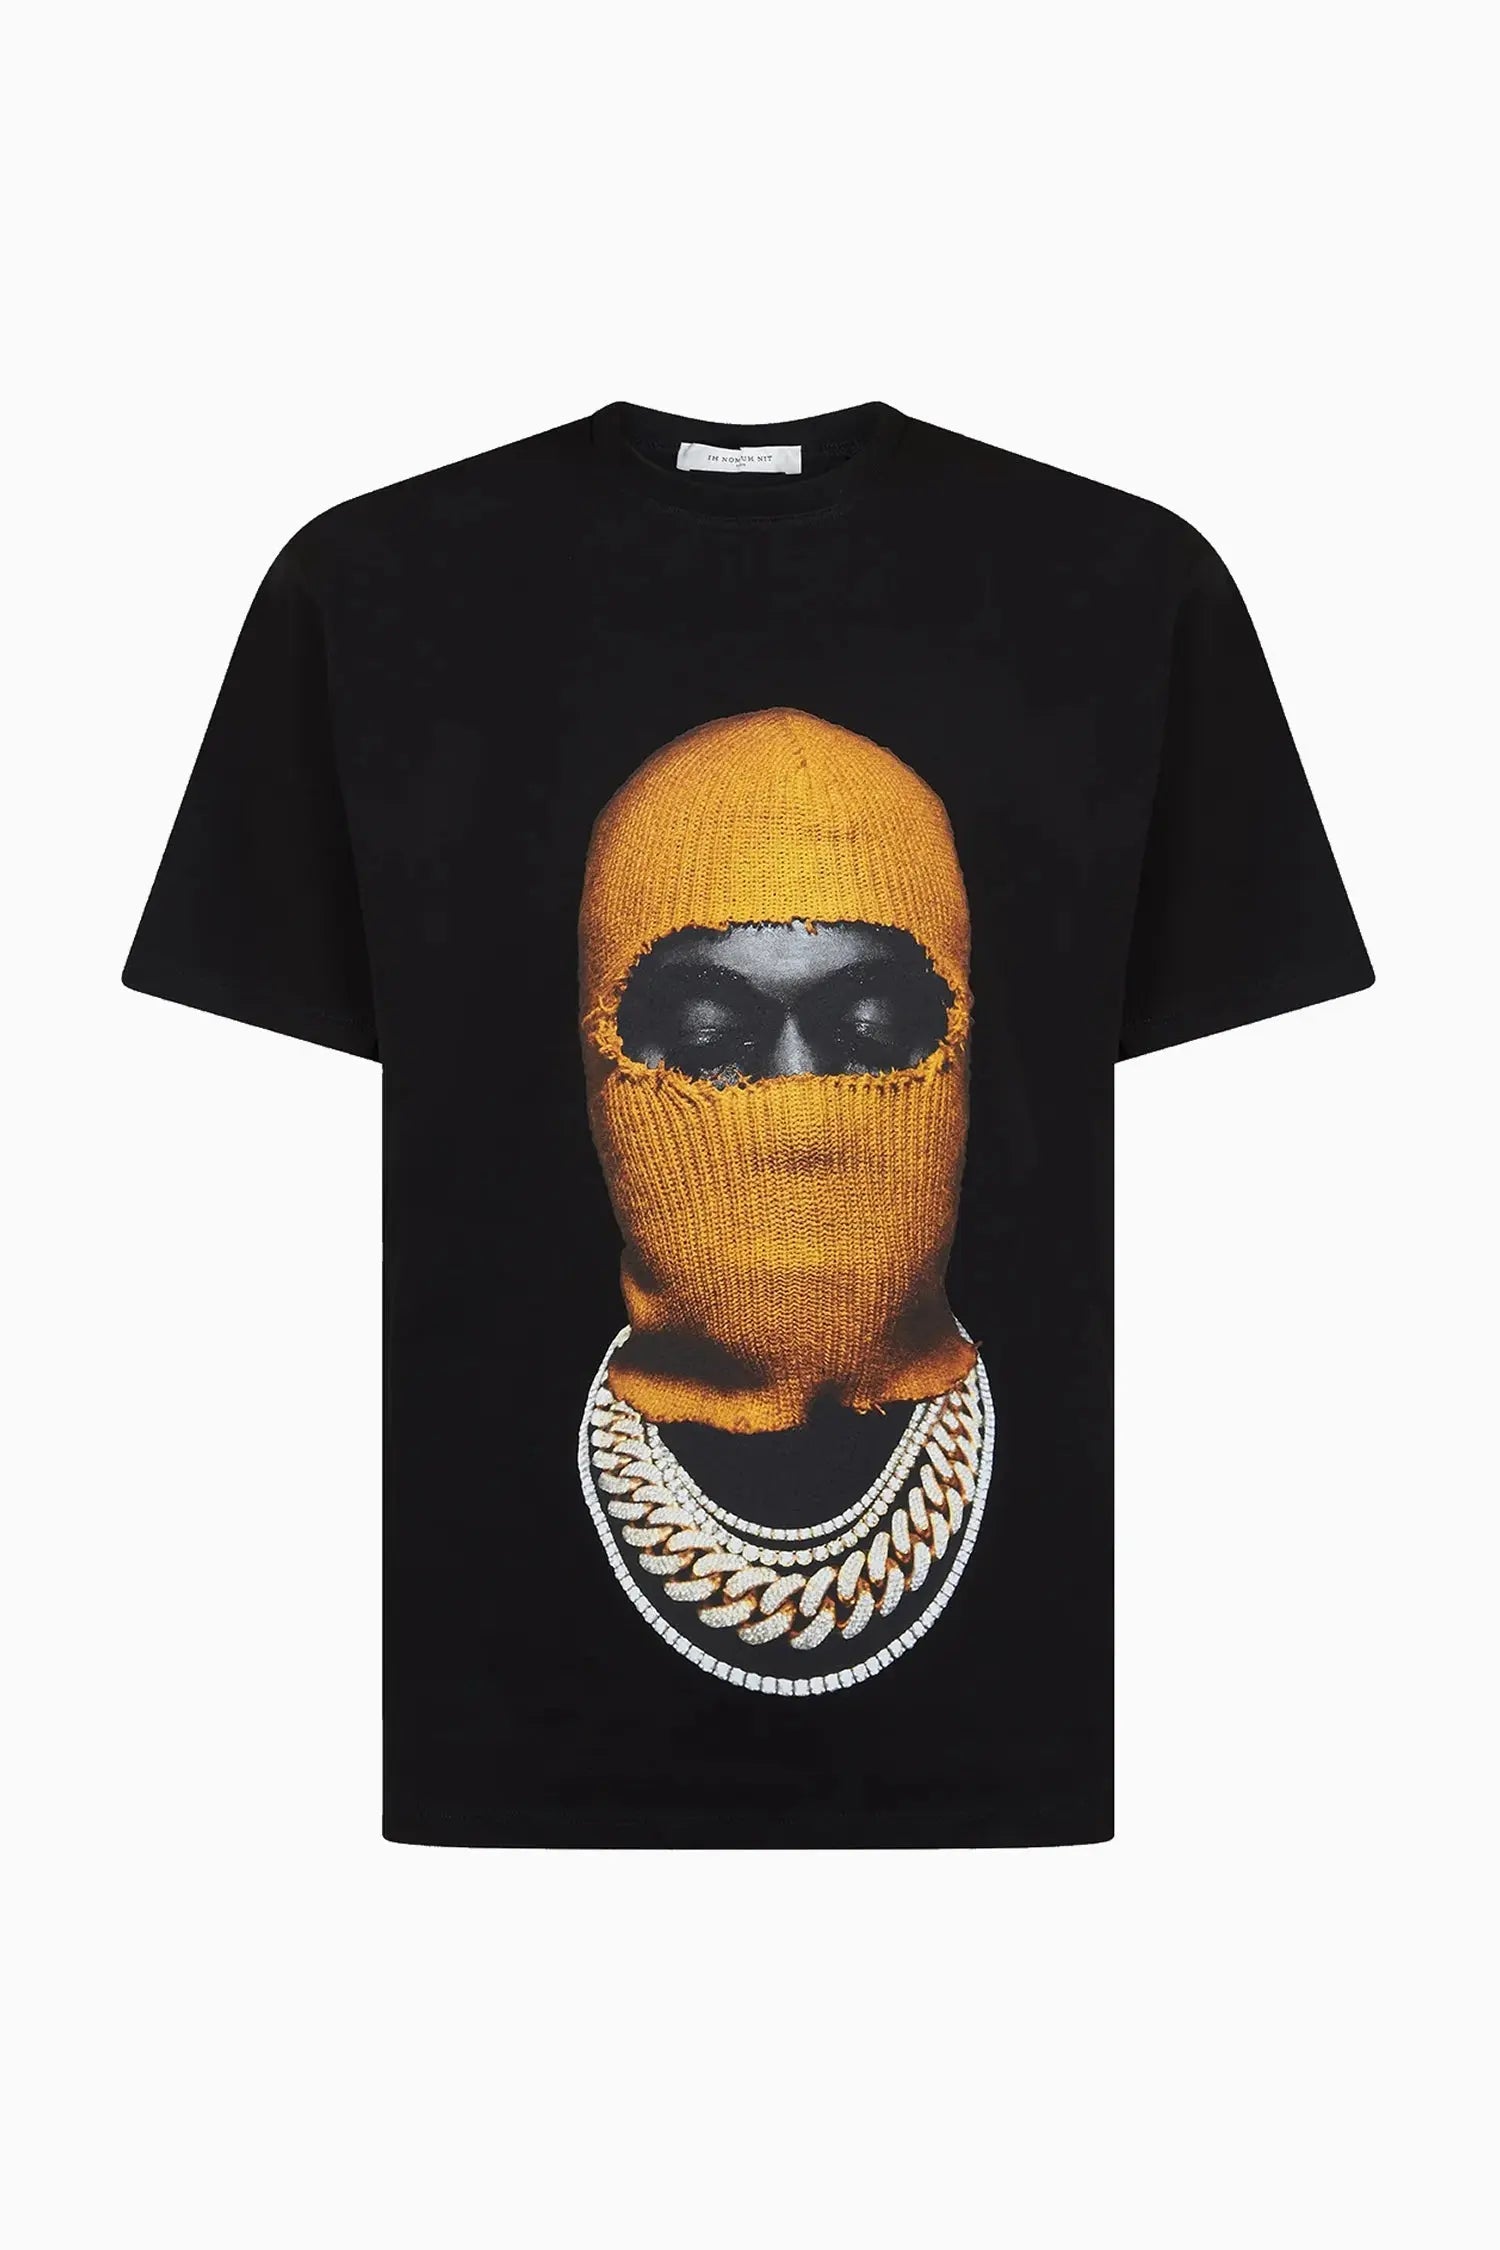 T-shirt with Mask20 with logo - IH NOM UH NIT